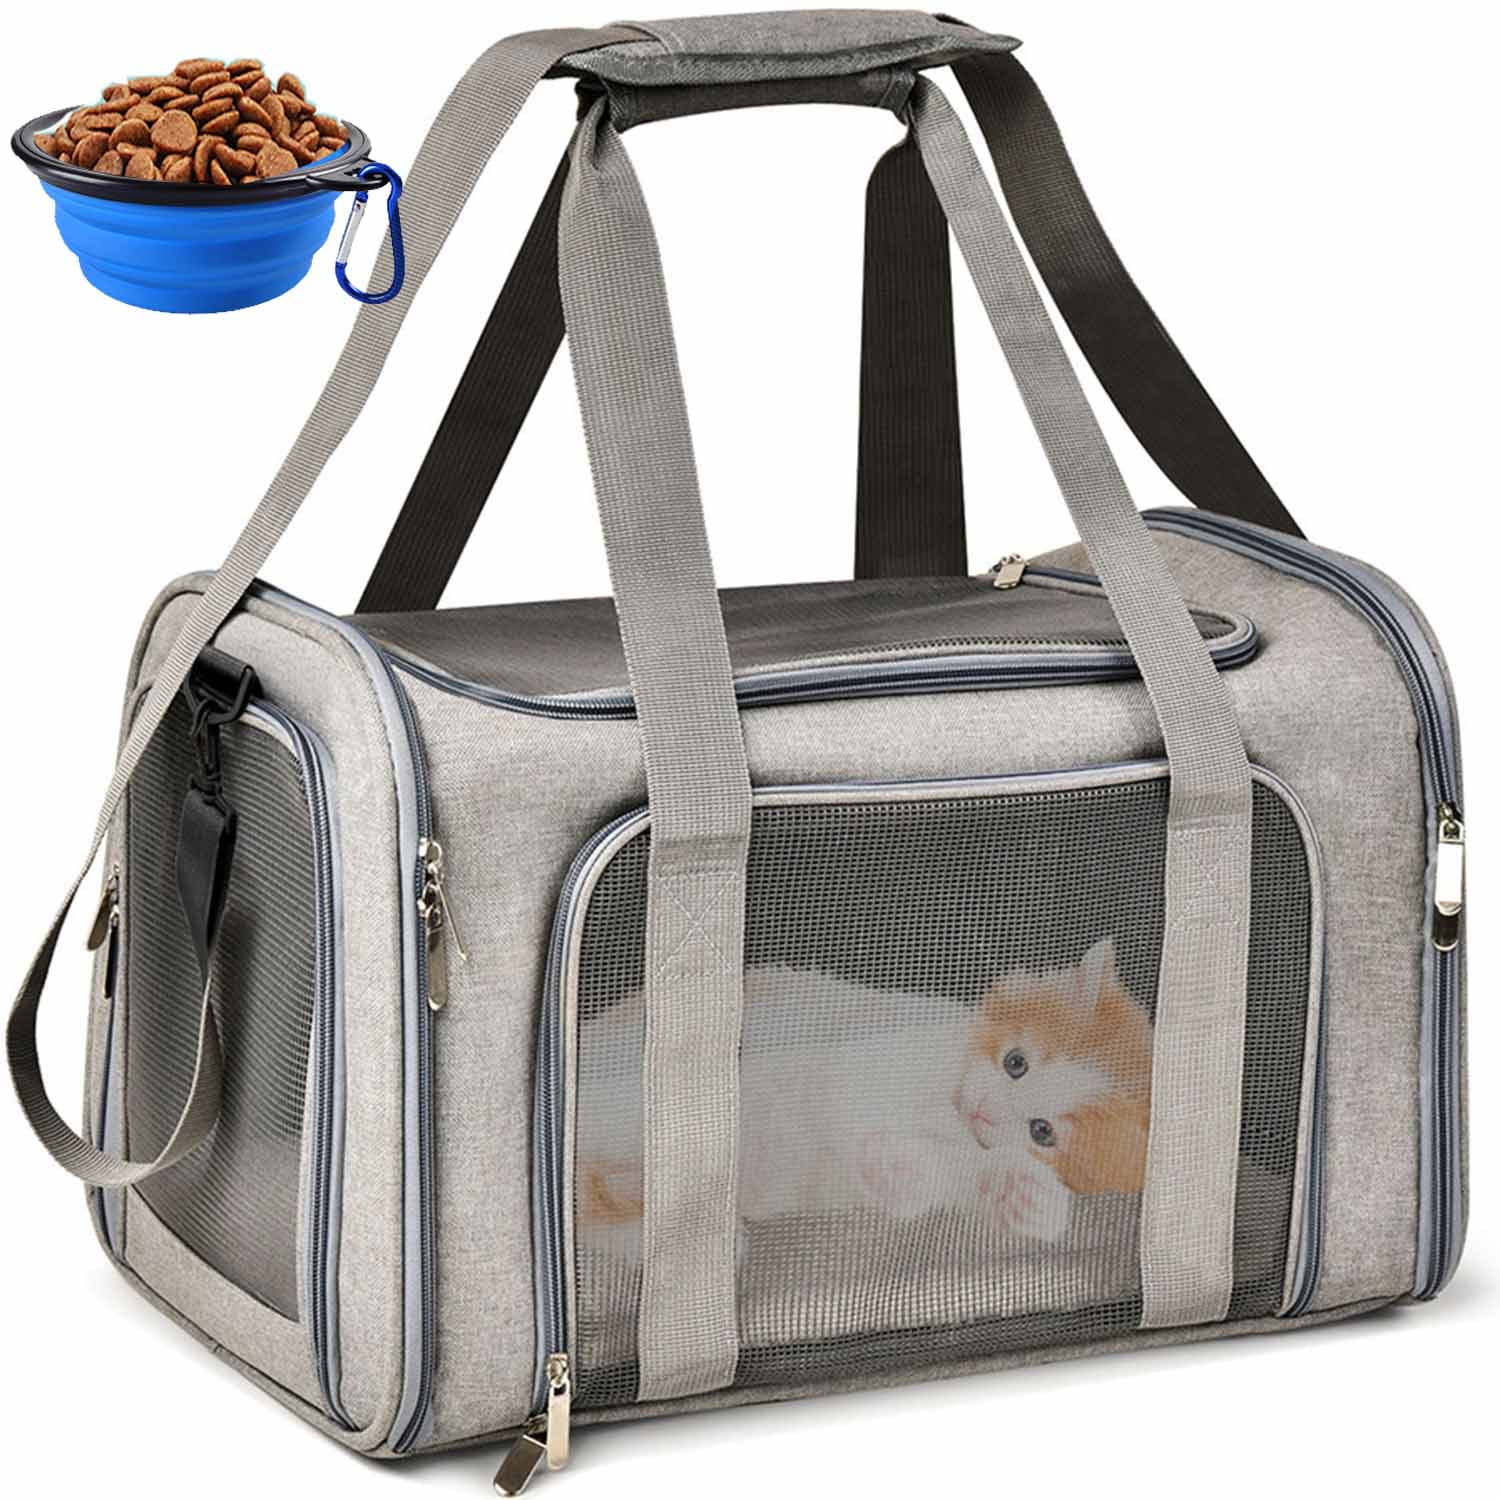 Transparent Pet Carrier Bag Side Opening Lightweight Carrier Case  Collapsible Pet Travel Carrier for Small Cats Dogs Q84D